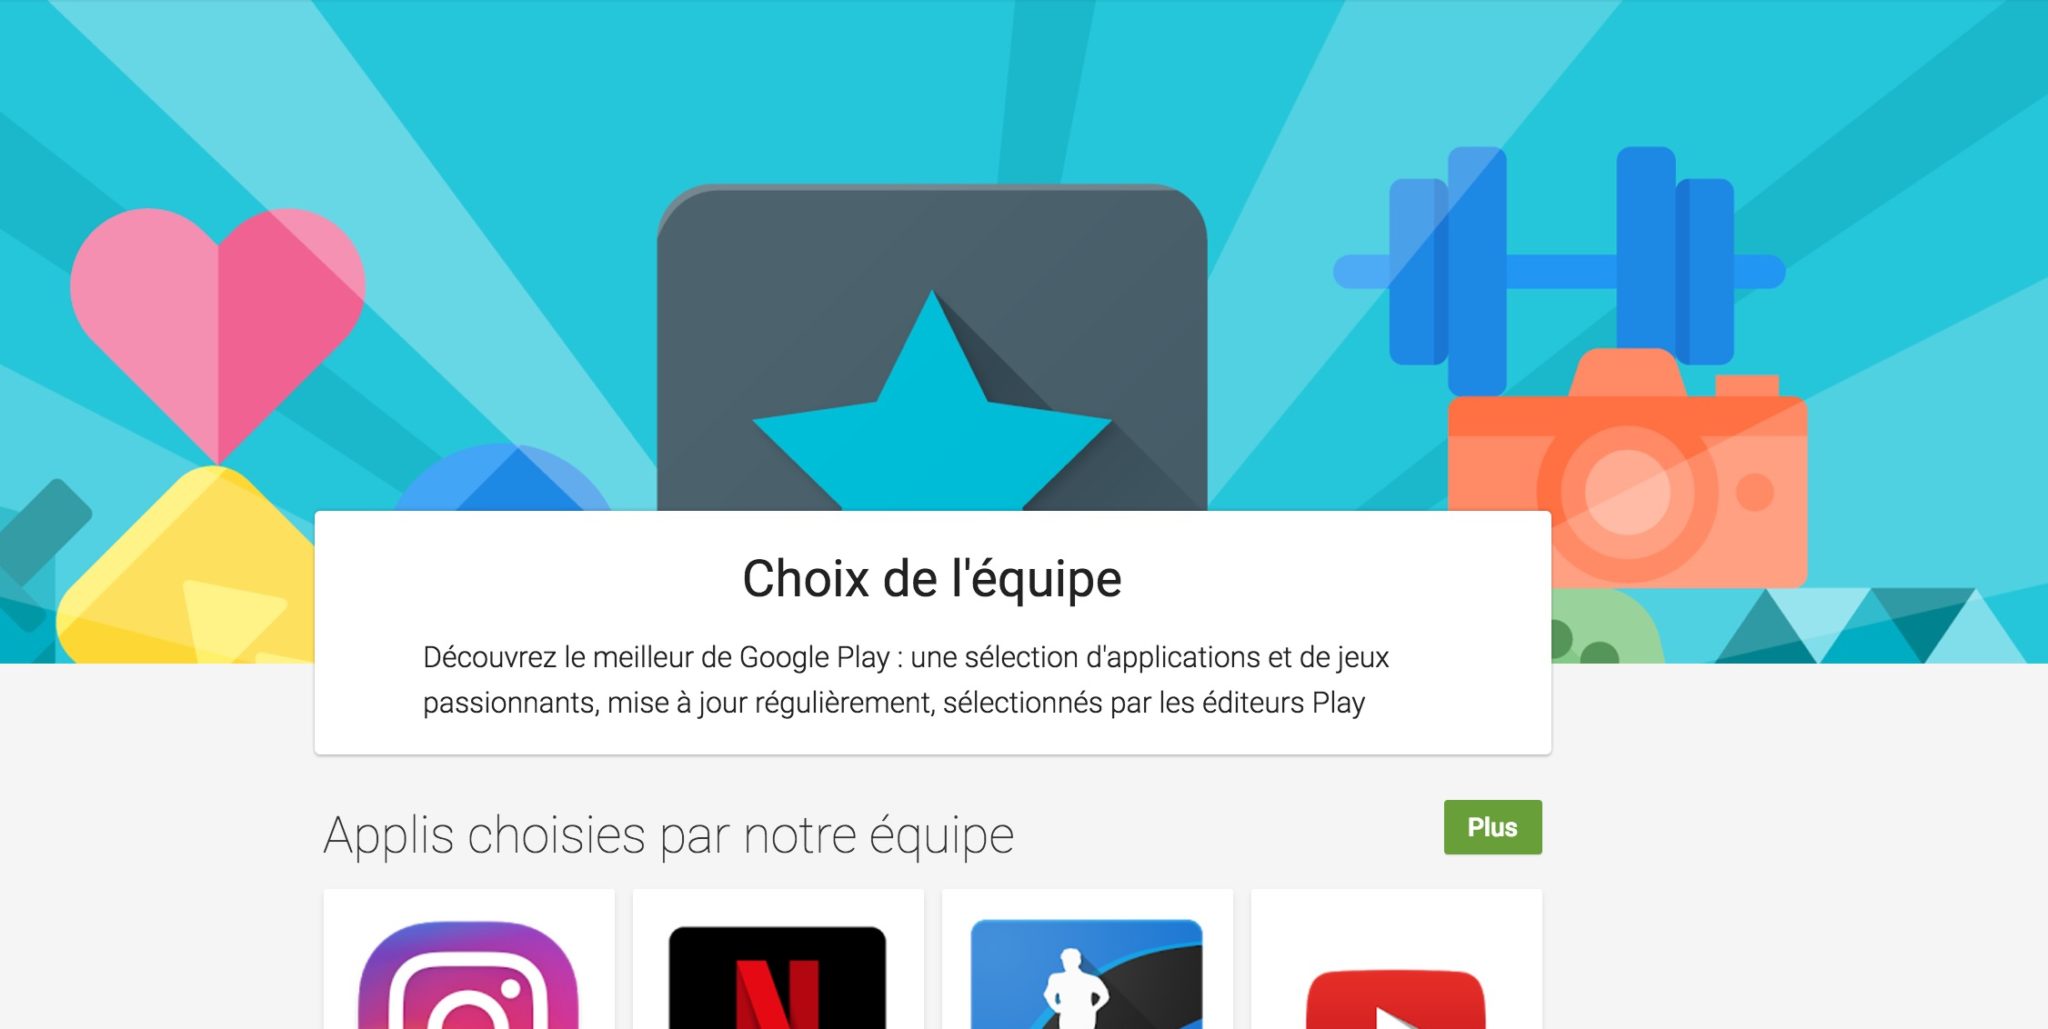 programme android excellence met en exergue meilleures apps android